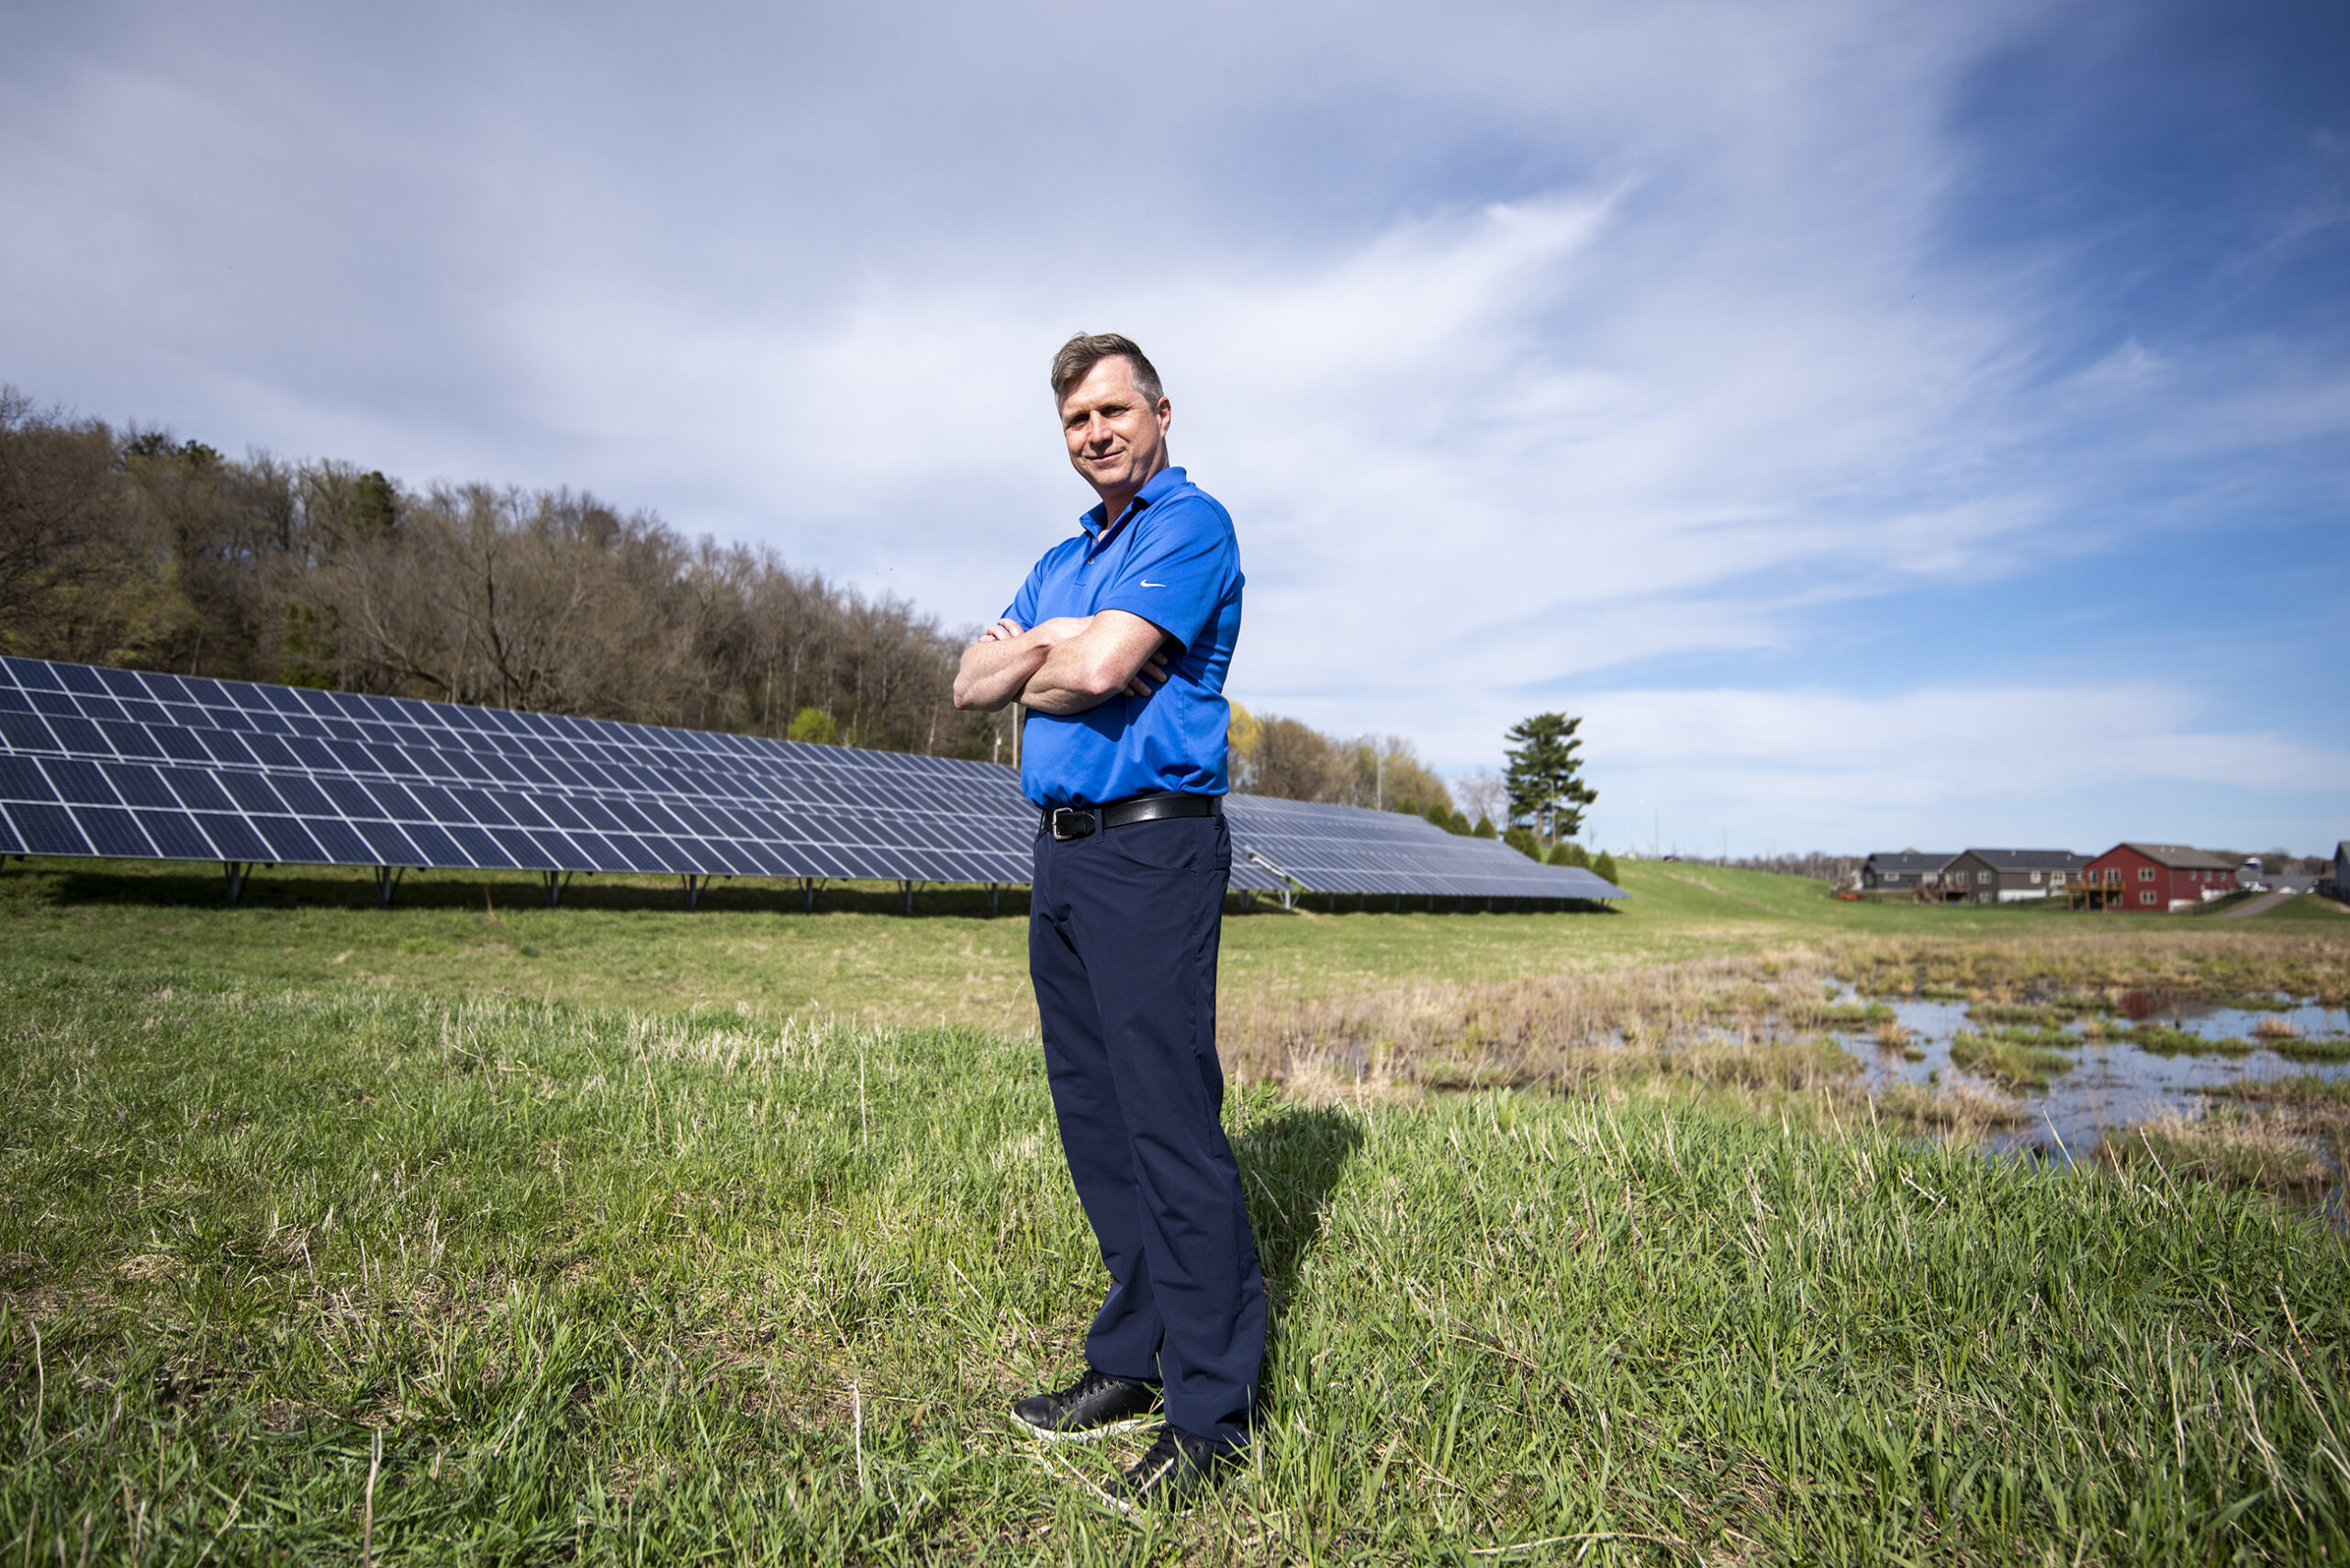 A man stands on green grass in front of a row of solar panels.